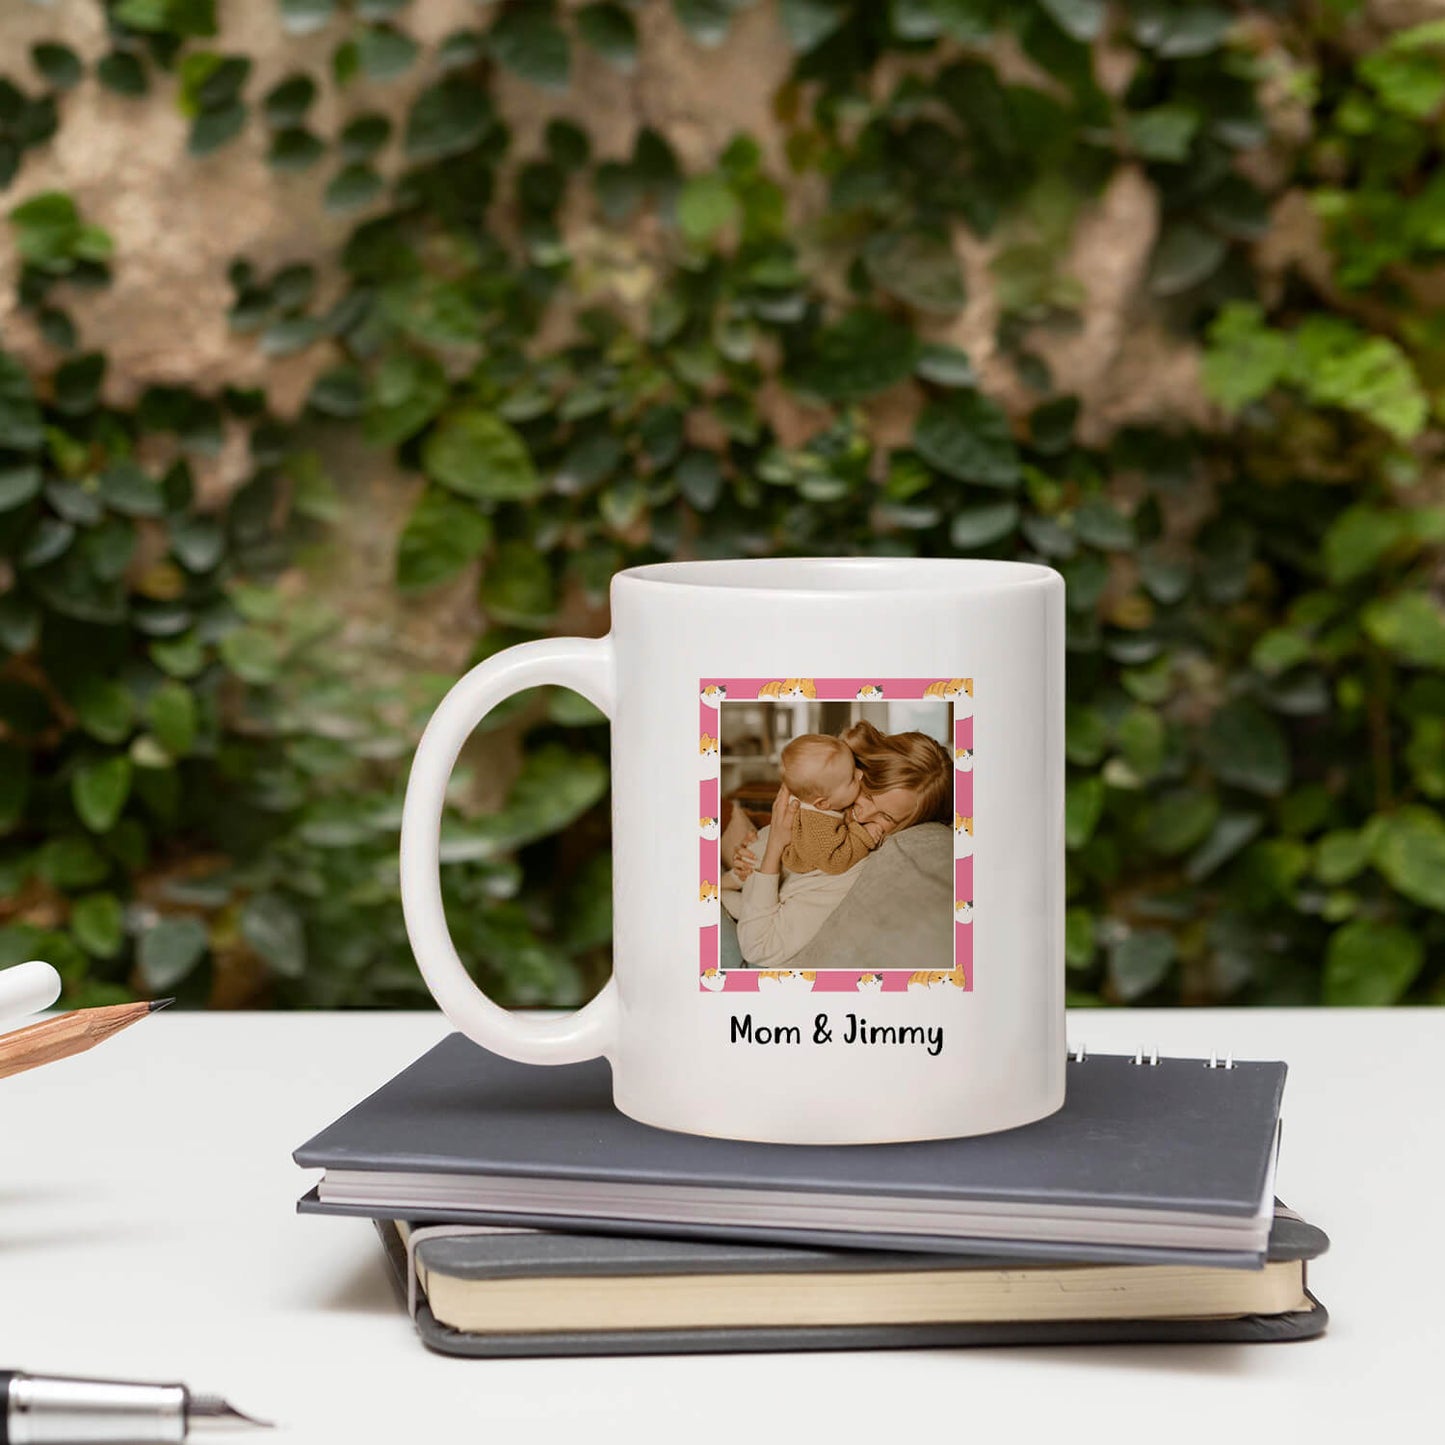 Mom You Are So Loafed - Personalized Mother's Day, Birthday, Valentine's Day or Christmas gift For Mom - Custom Mug - MyMindfulGifts